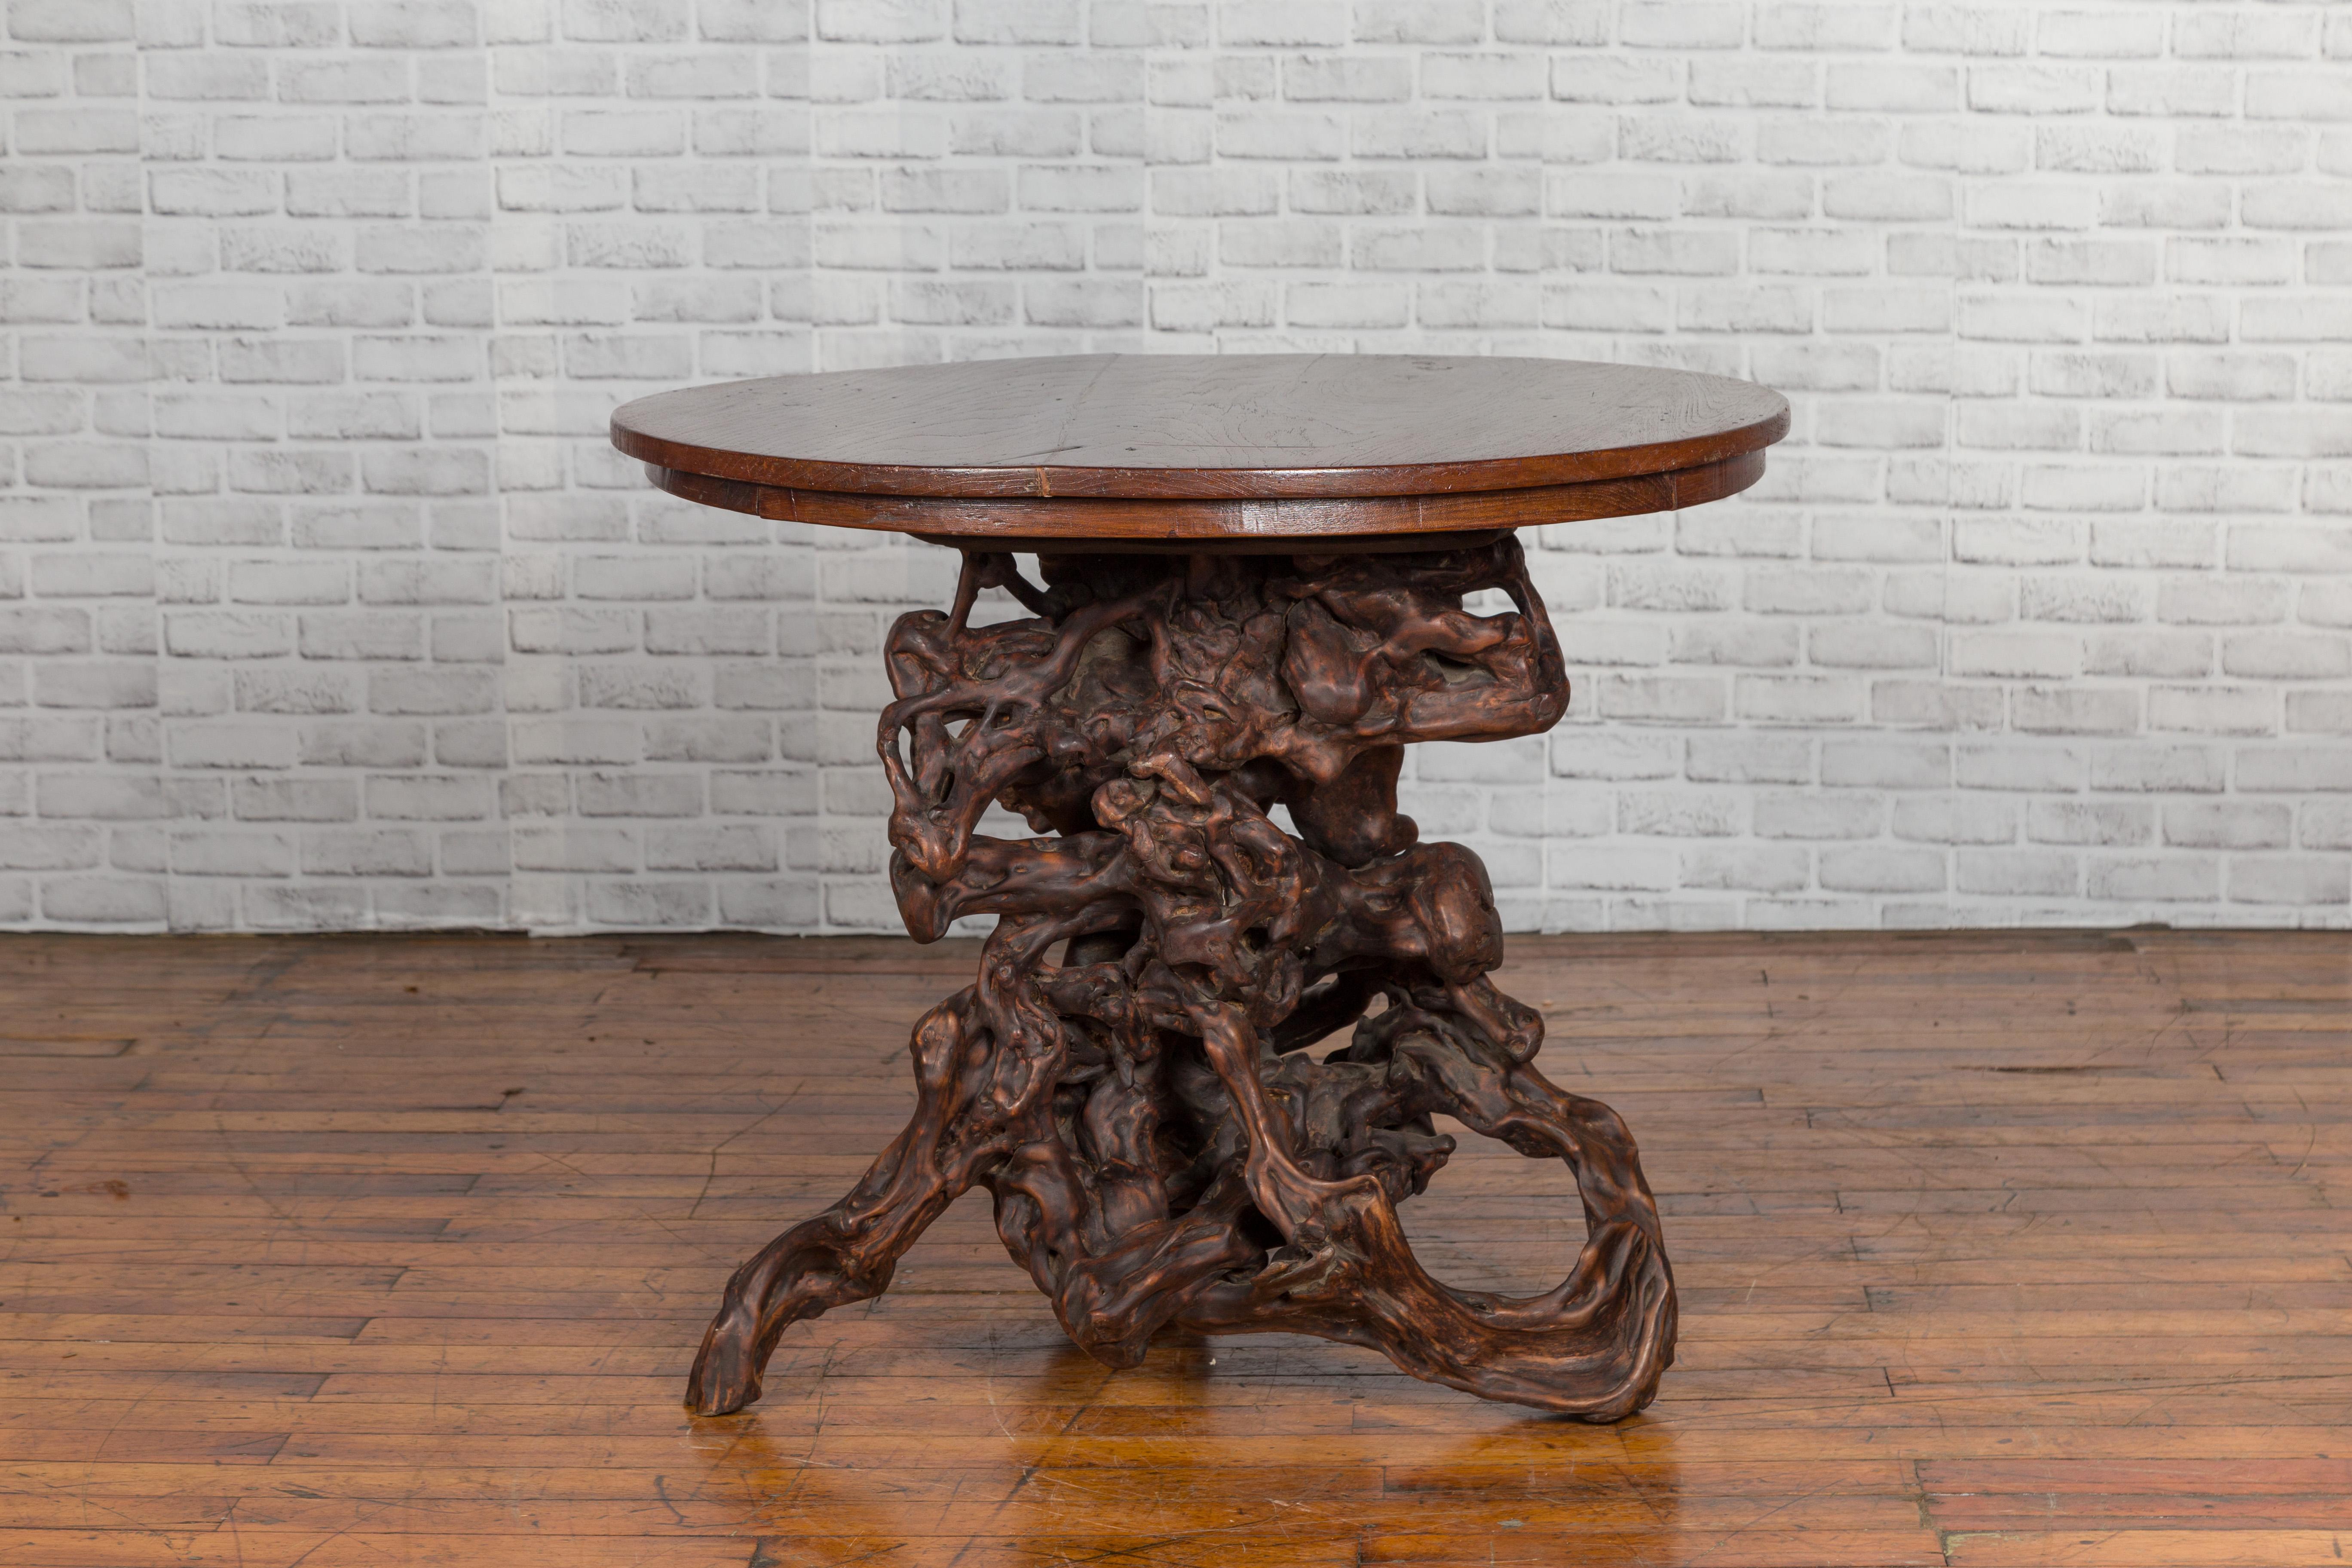 20th Century Antique Chinese Rustic Root Table with Circular Top and Dark Patina